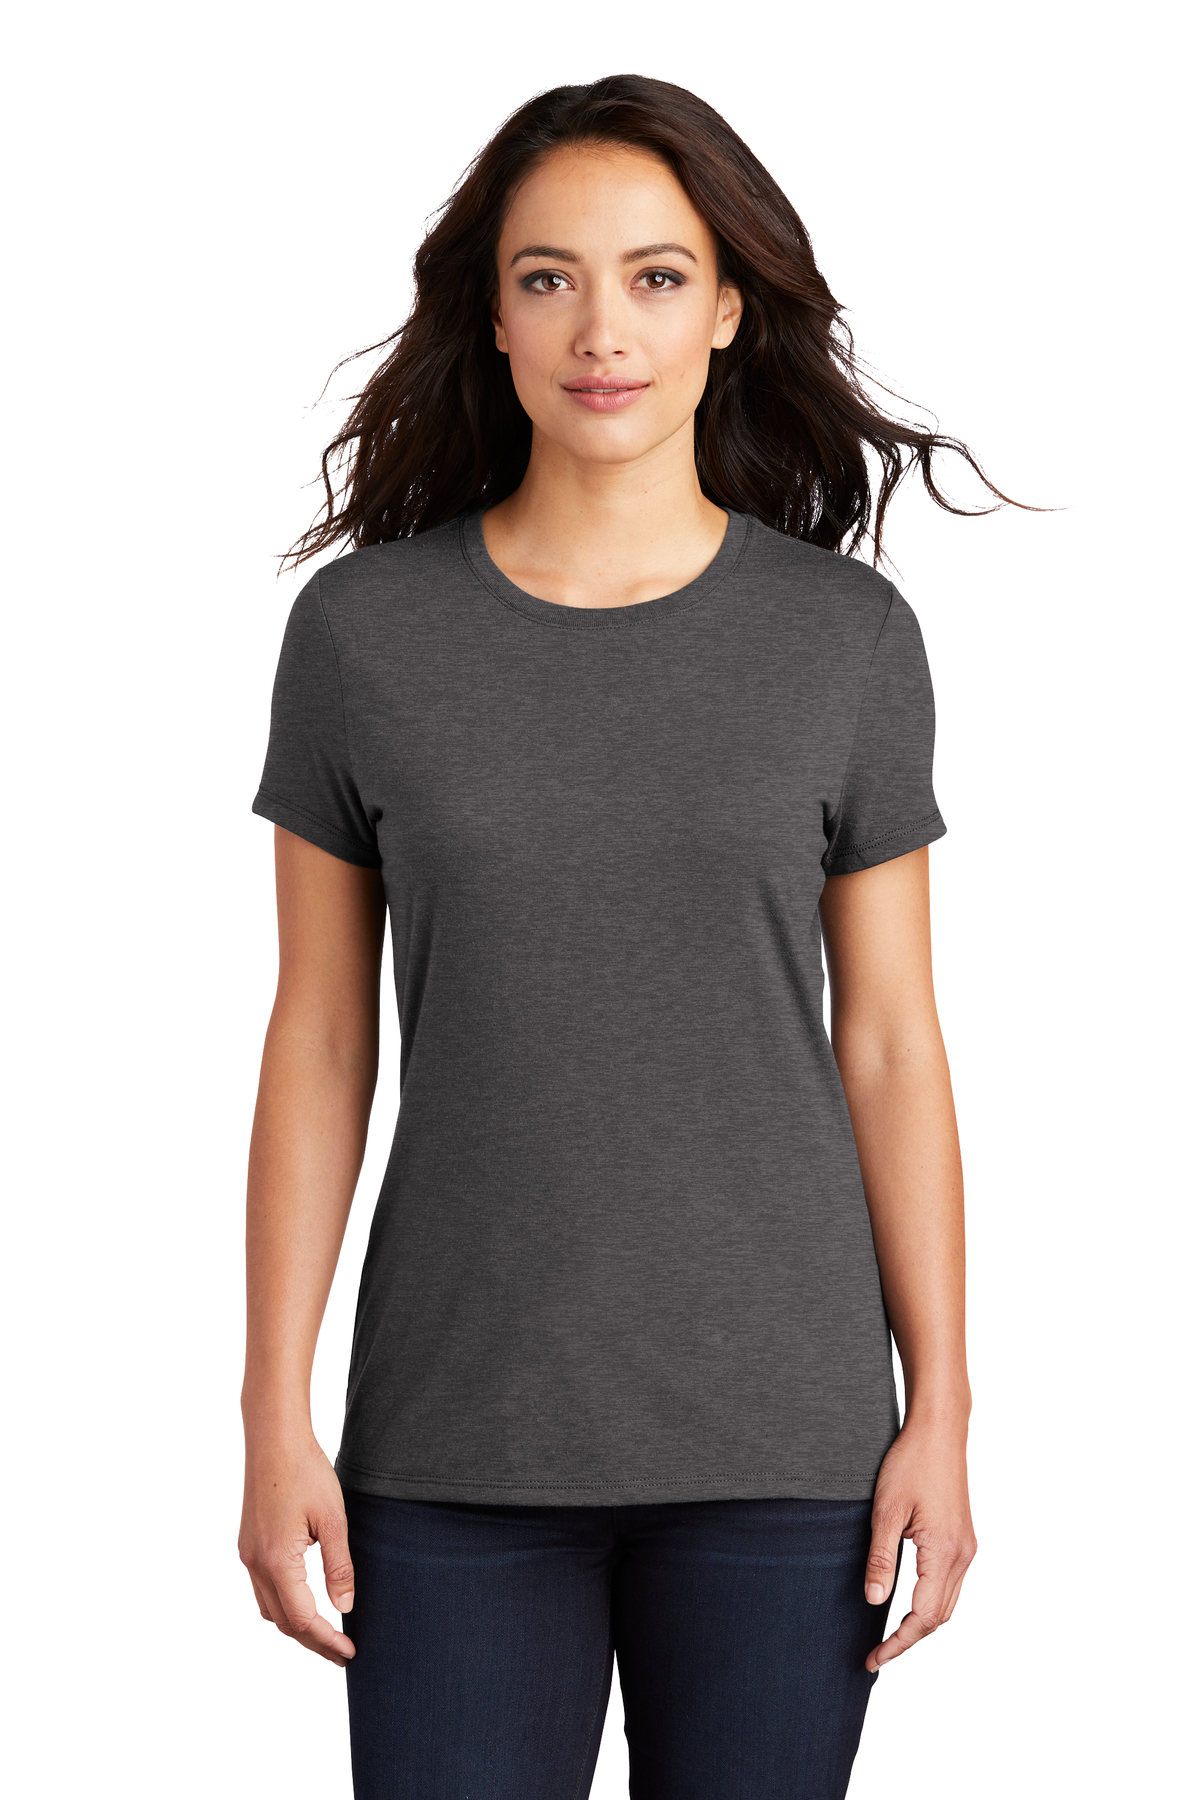 District Printed Women's Perfect TriBlend Tee | Printed Triblend Tee ...